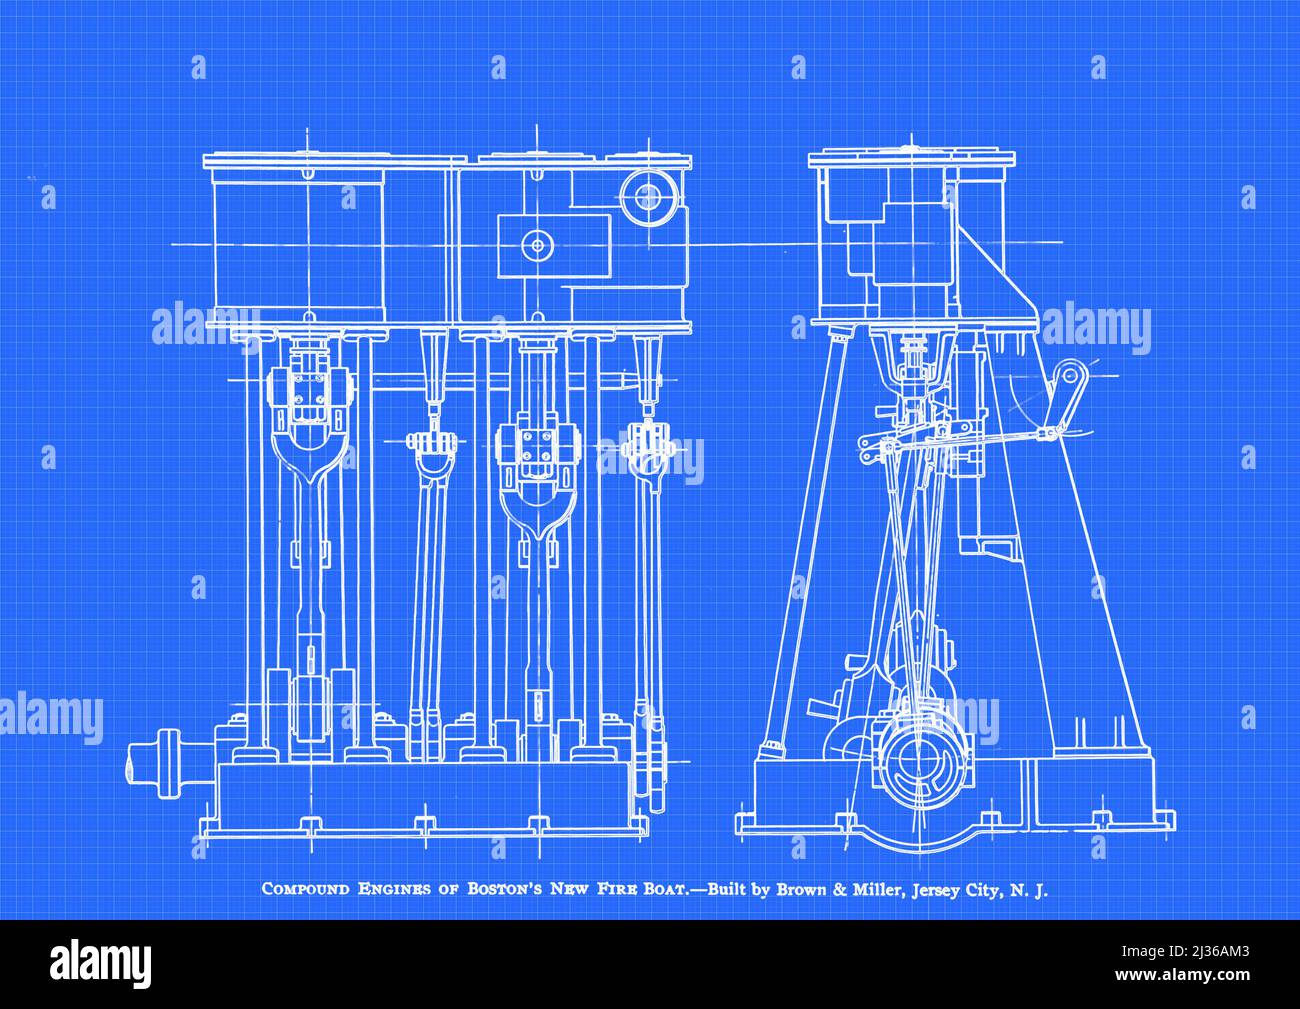 blueprint of the Compound Engines ok Boston's New Fire Boat. Built by Brown & Miller, Jersey Citv, N. J. from the book ' Steam vessels and marine engines ' by G. Foster Howell, Publisher New York : American Shipbuilder 1896 Stock Photo